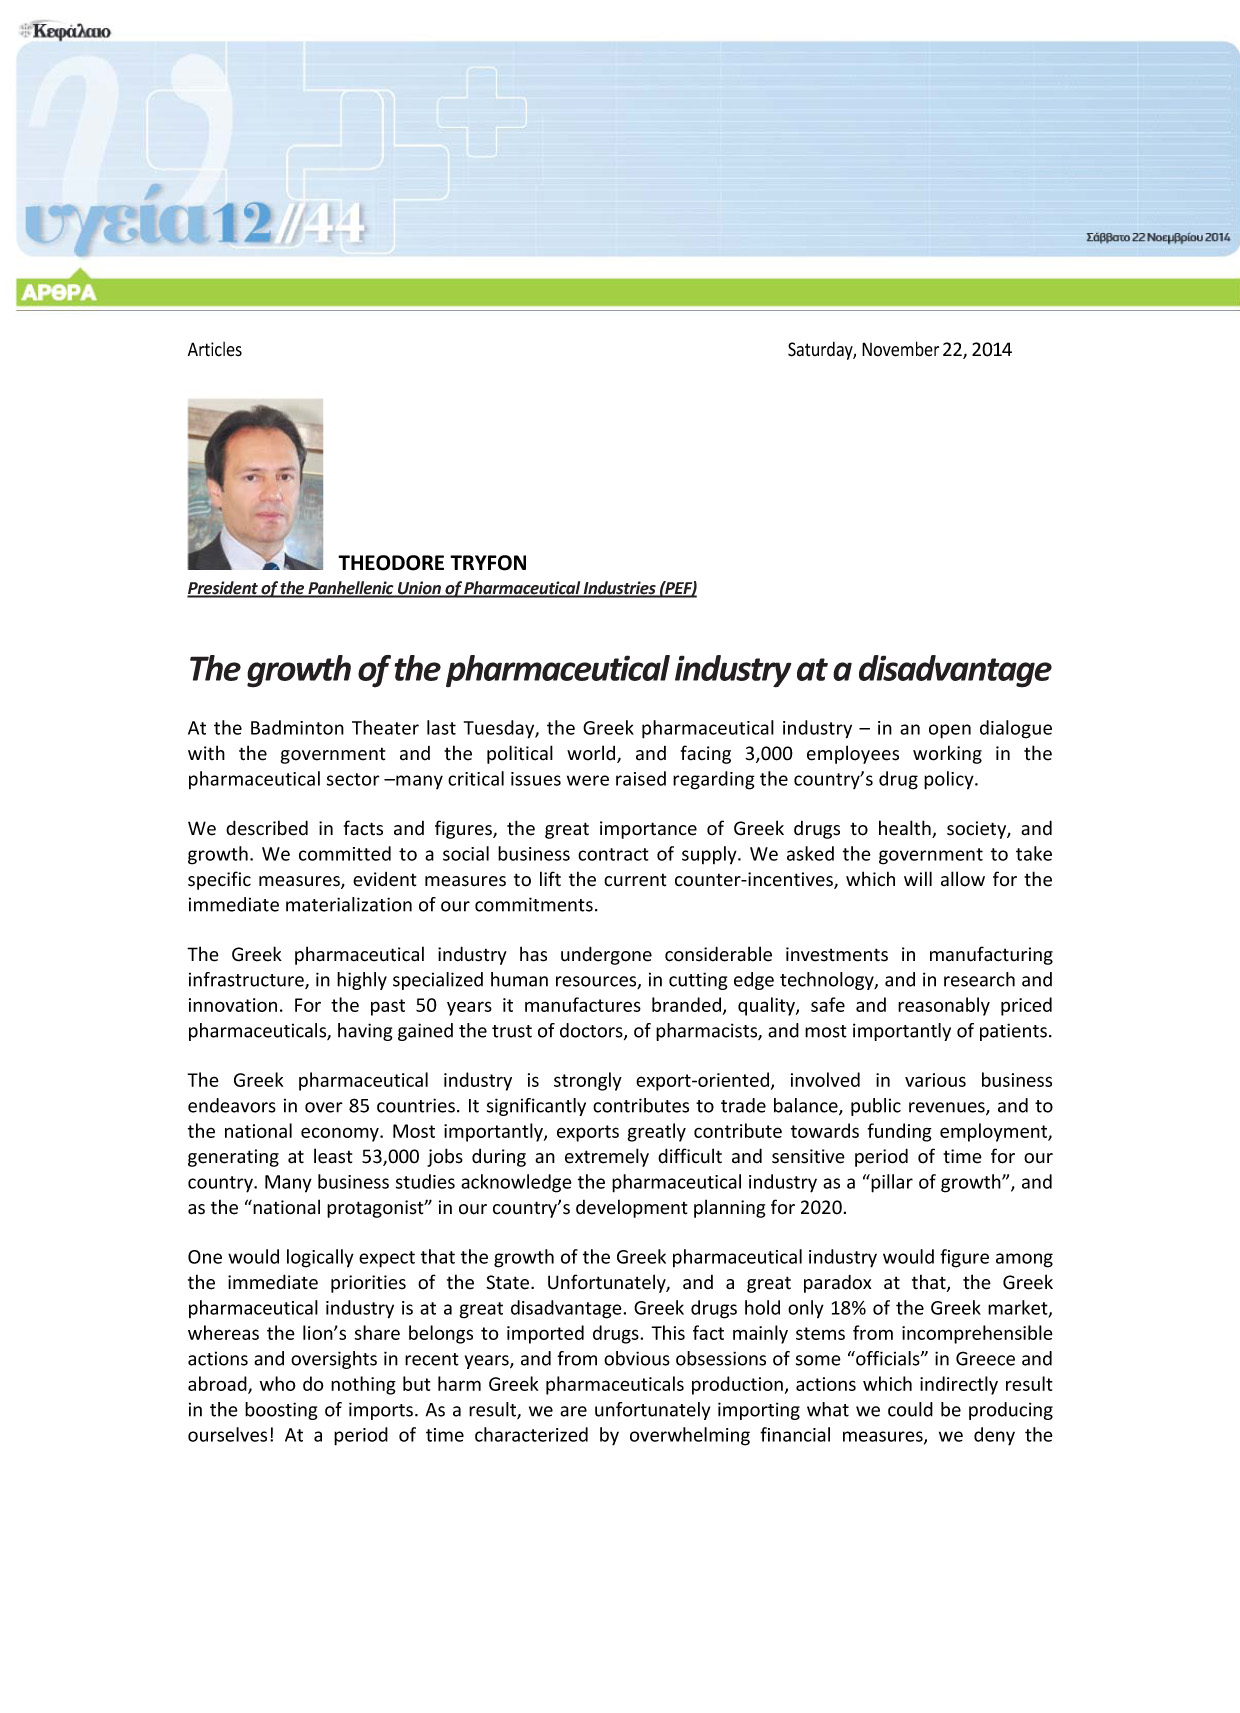 Theodore Tryfon President of the Panhellenic Union of Pharmaceutical Industries (PEF) The growth of the pharmaceutical industry at a disadvantage